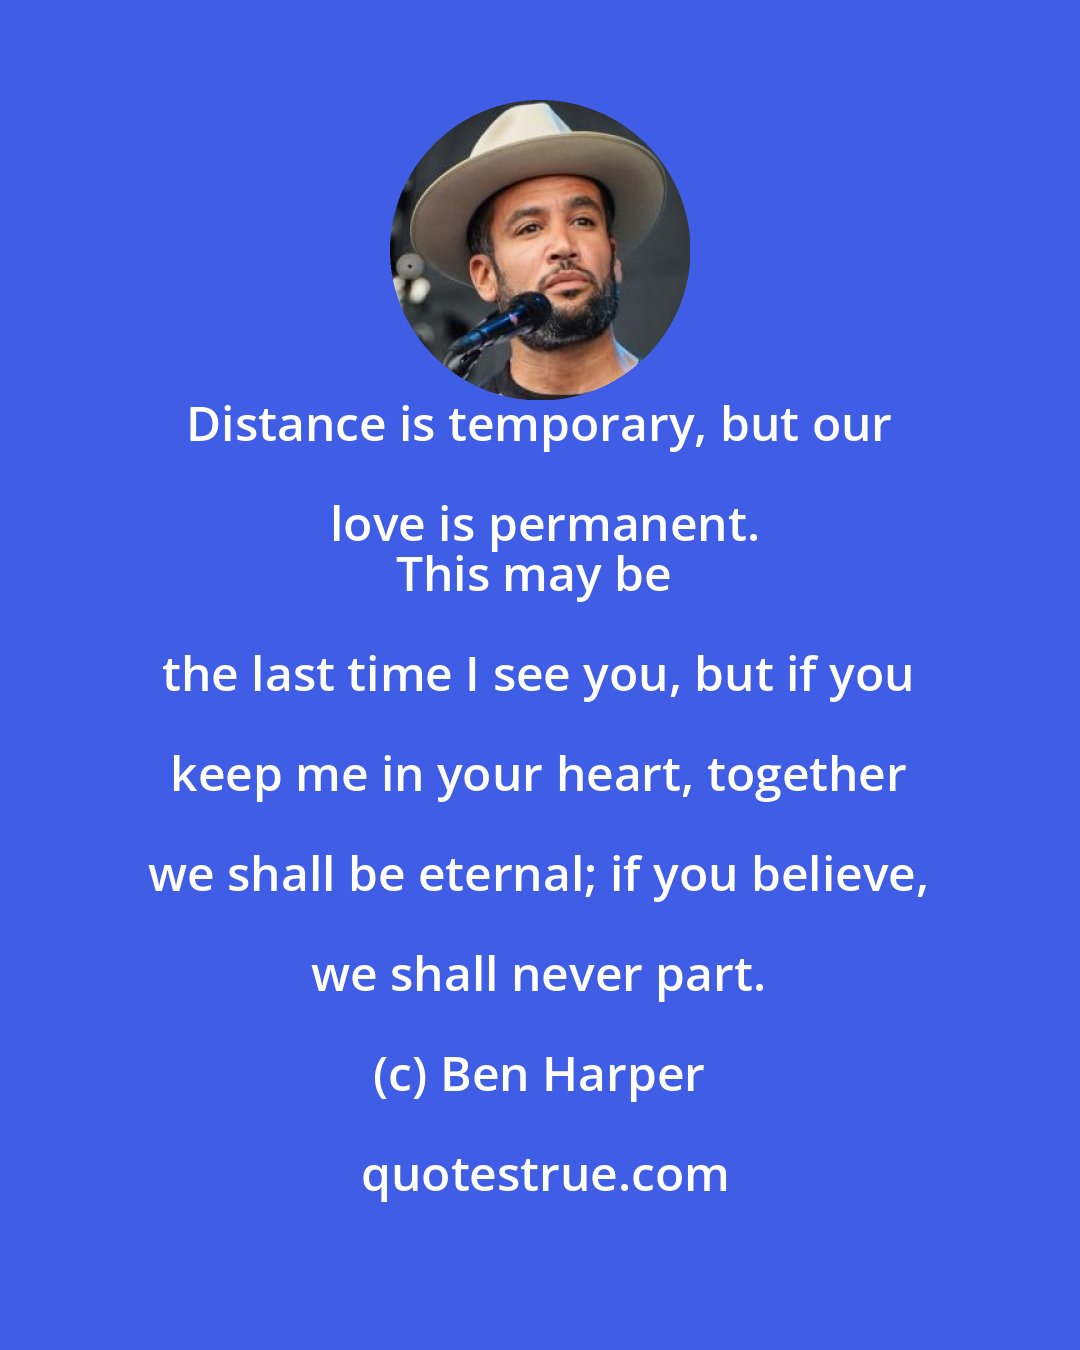 Ben Harper: Distance is temporary, but our love is permanent.
This may be the last time I see you, but if you keep me in your heart, together we shall be eternal; if you believe, we shall never part.